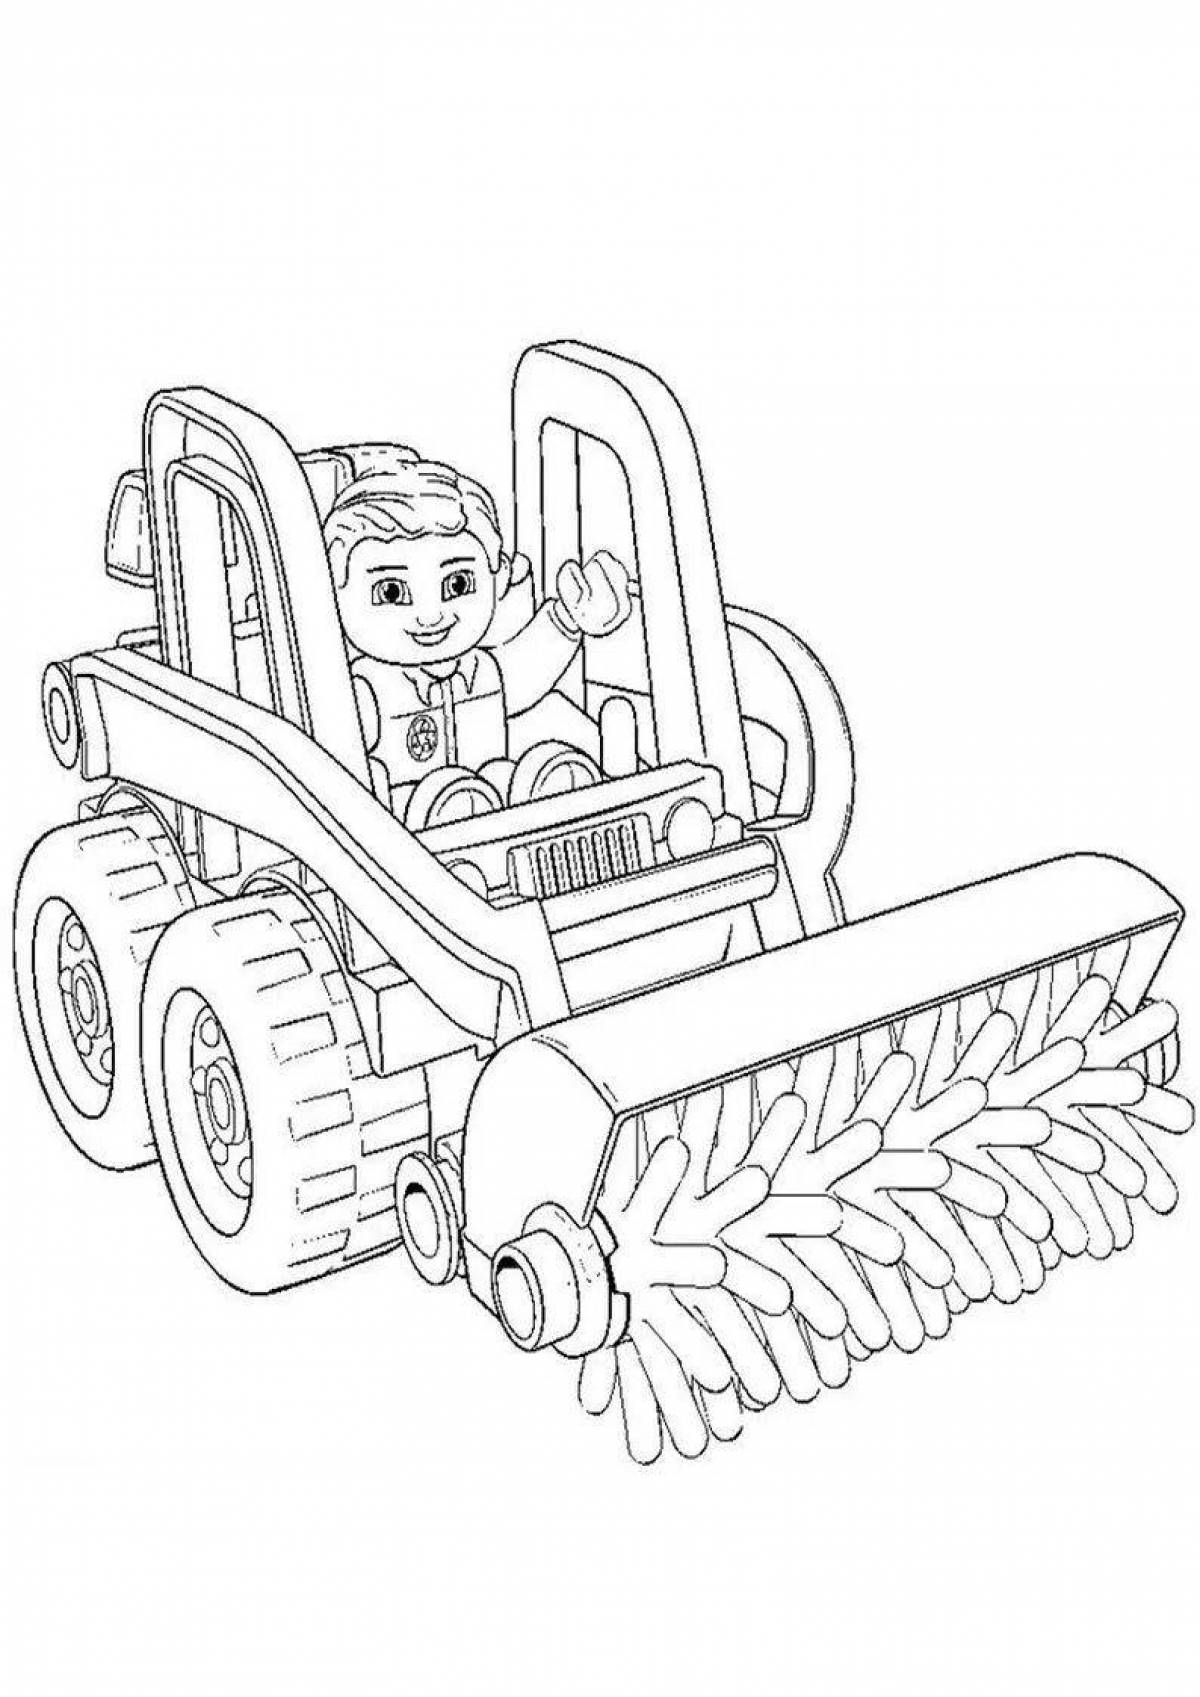 Colouring awesome snowplow